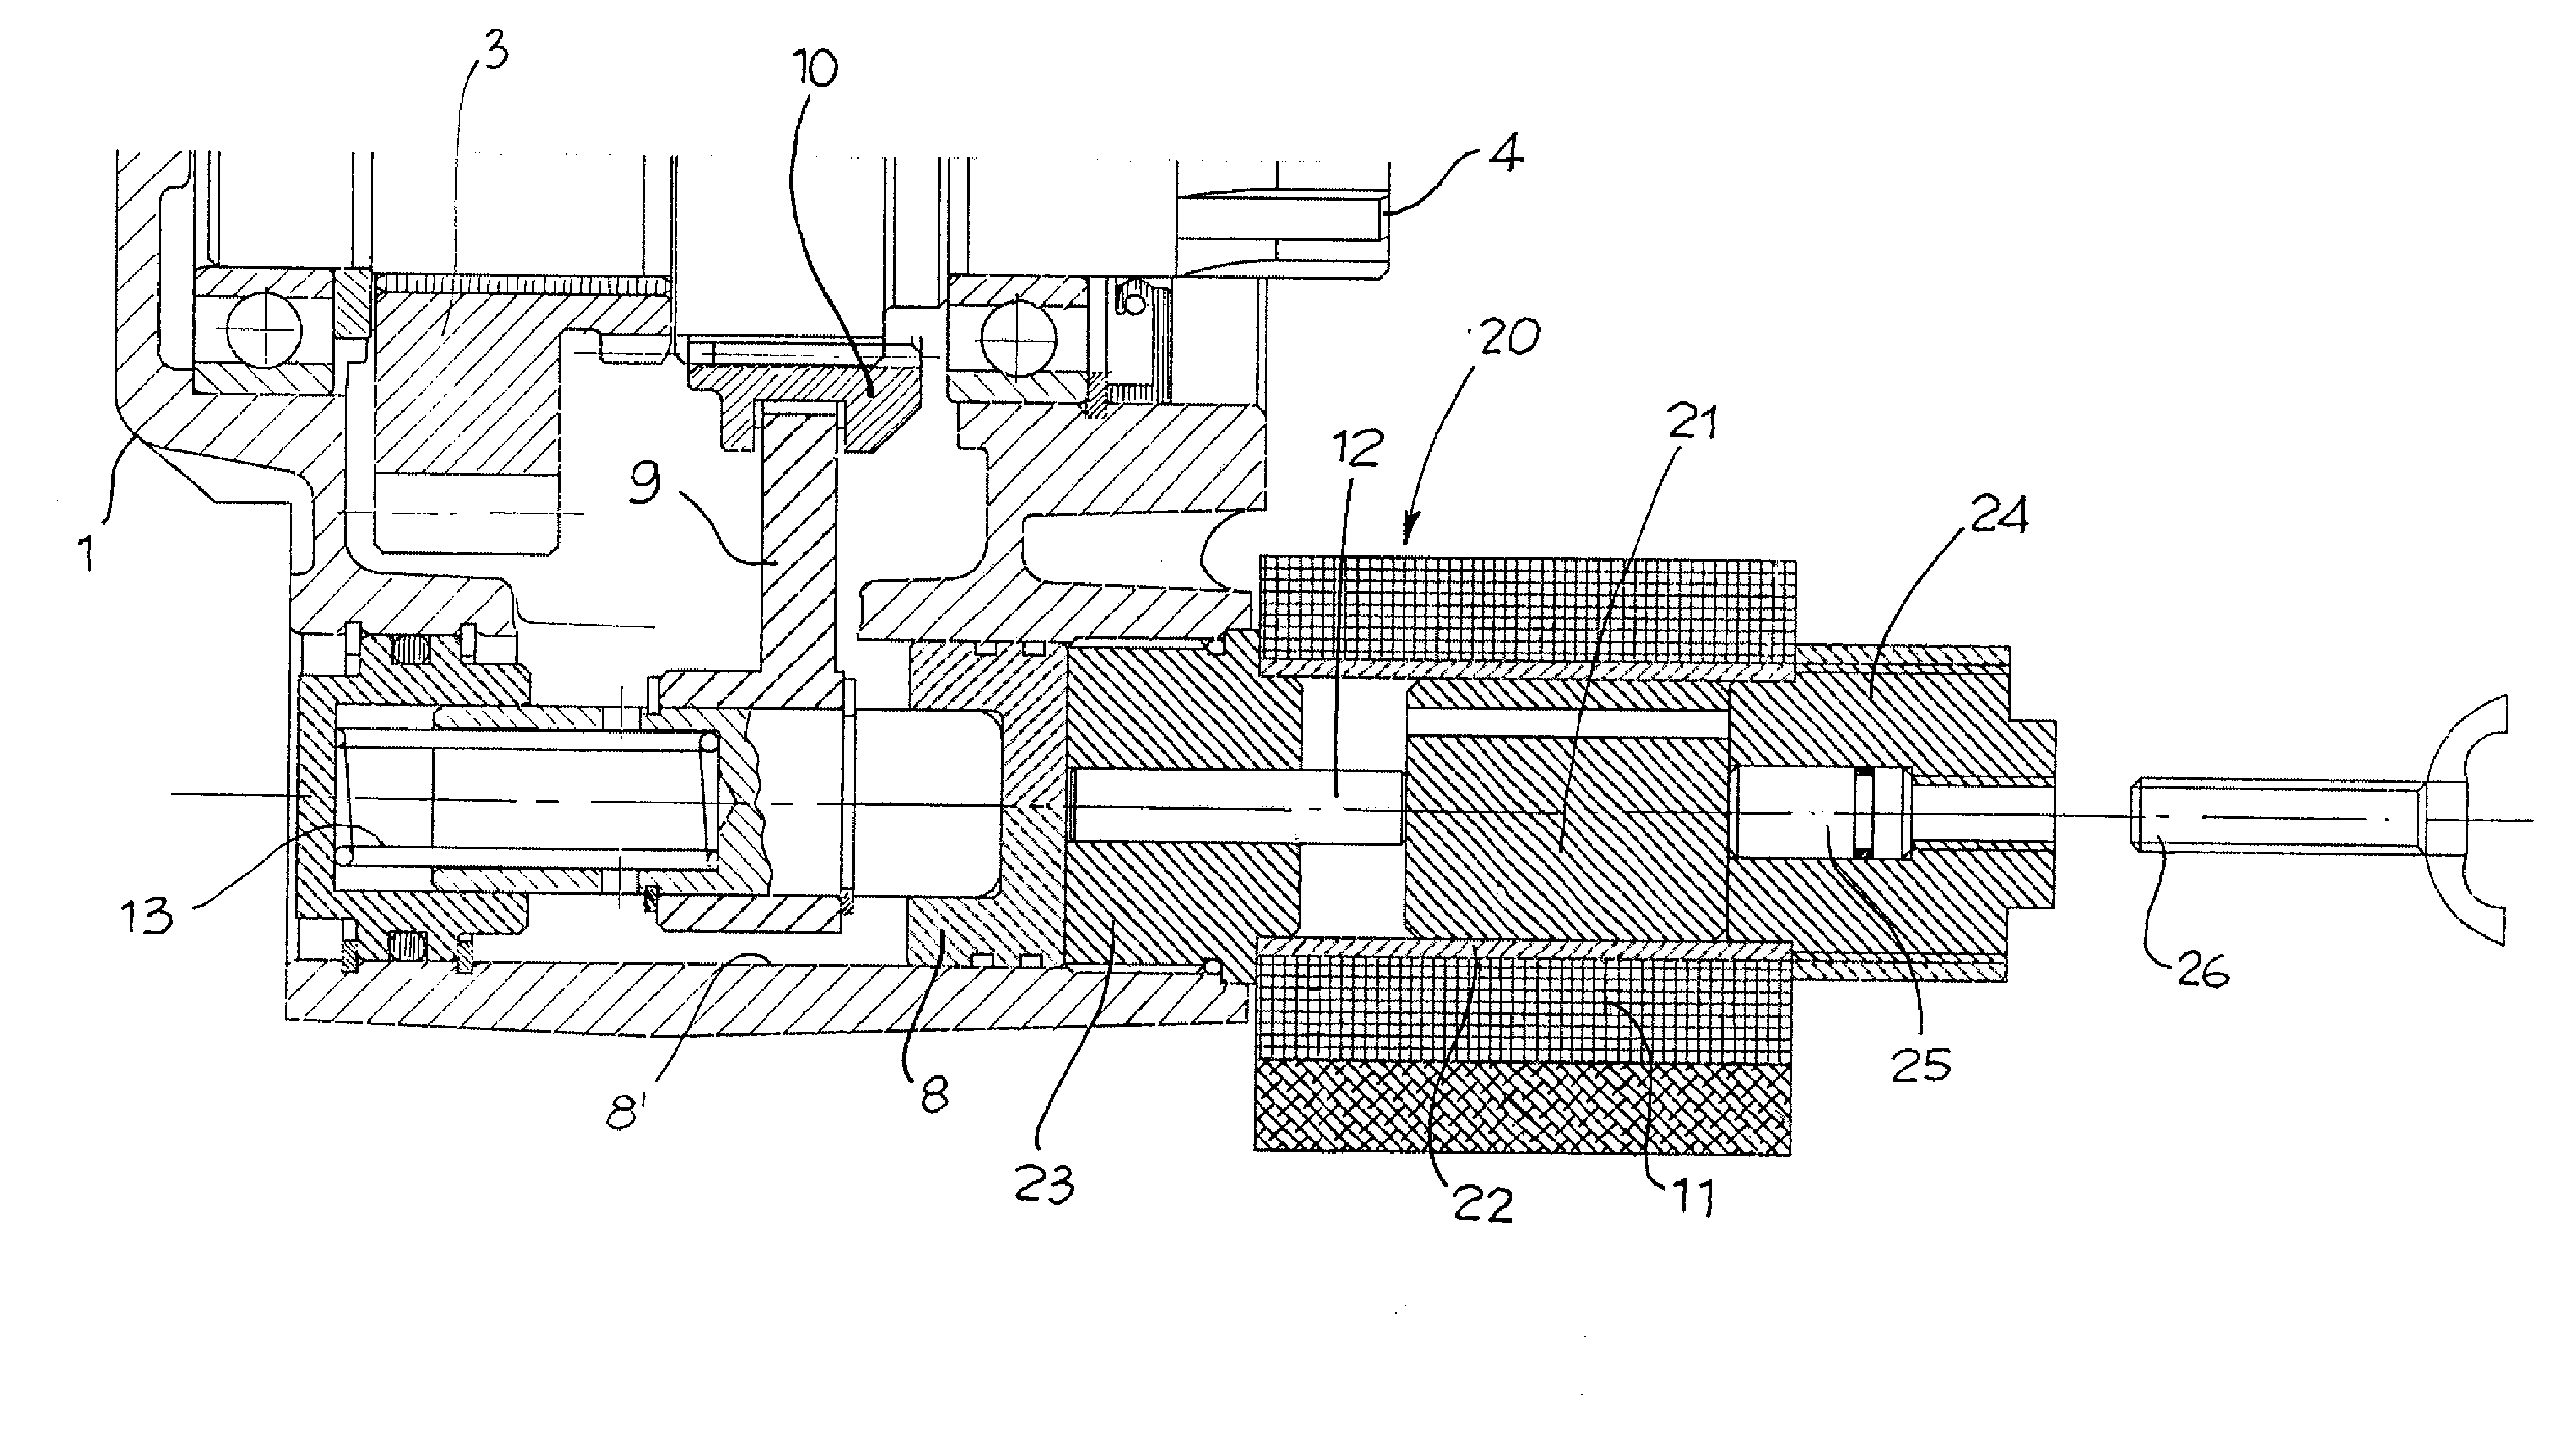 Solenoid Device for Engaging Power Takeoffs